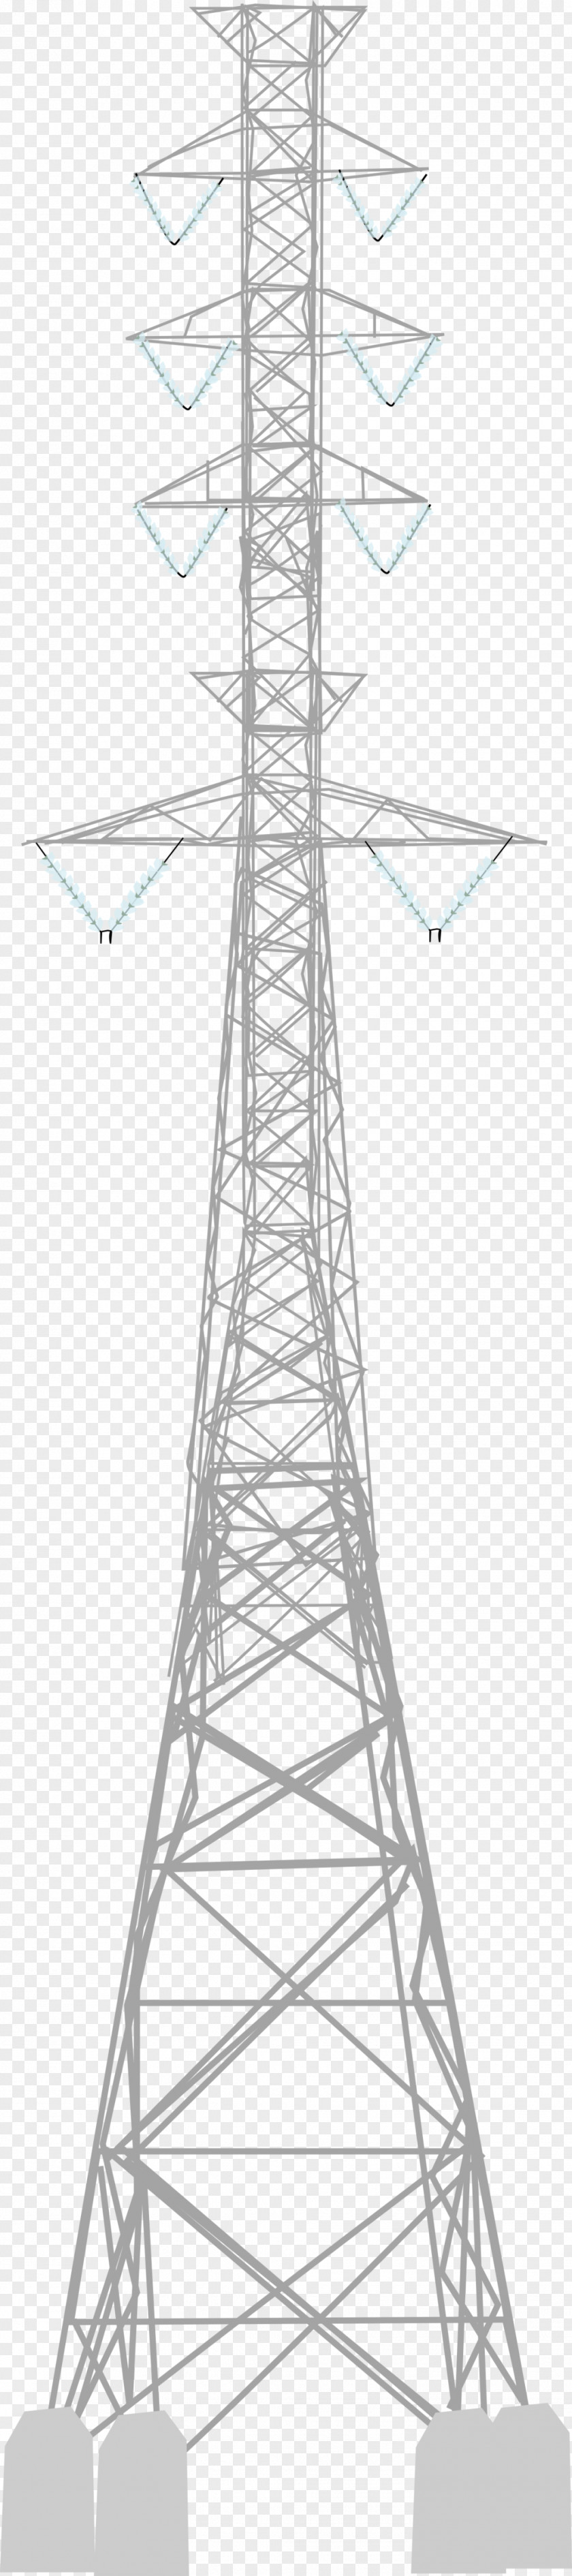 Design Transmission Tower Electricity Drawing Public Utility PNG